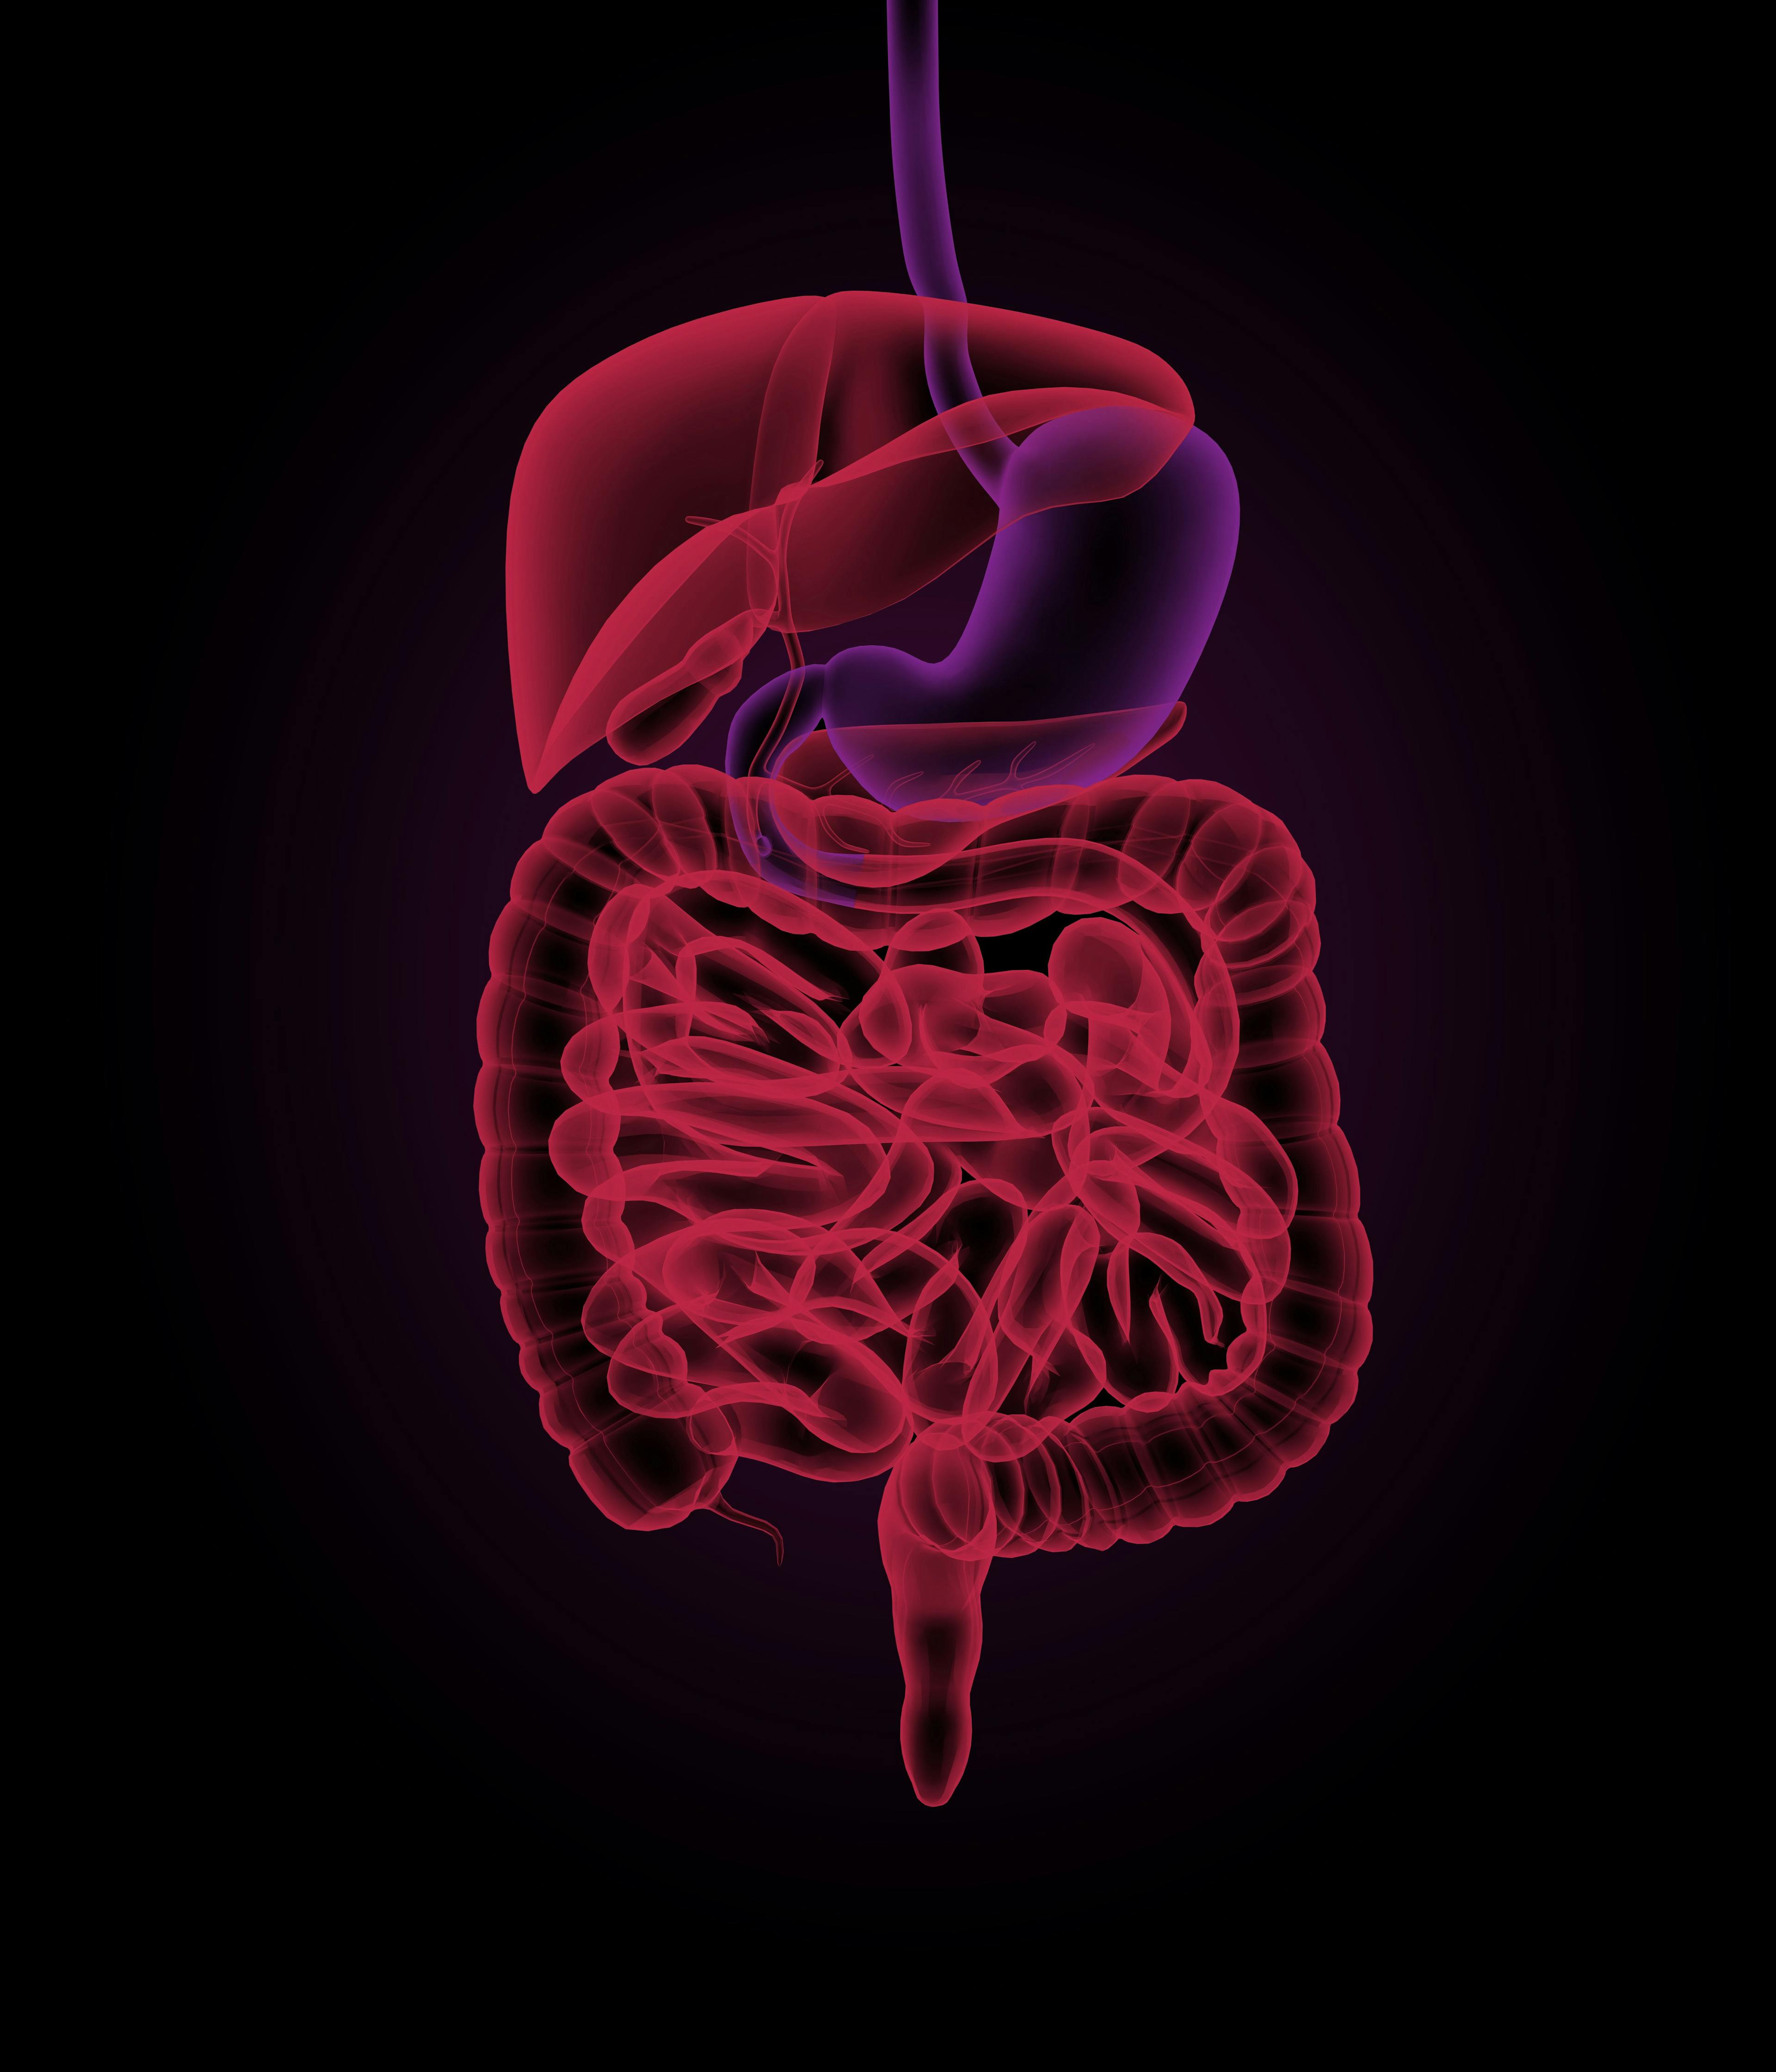 3D rendering of gastrointestinal system